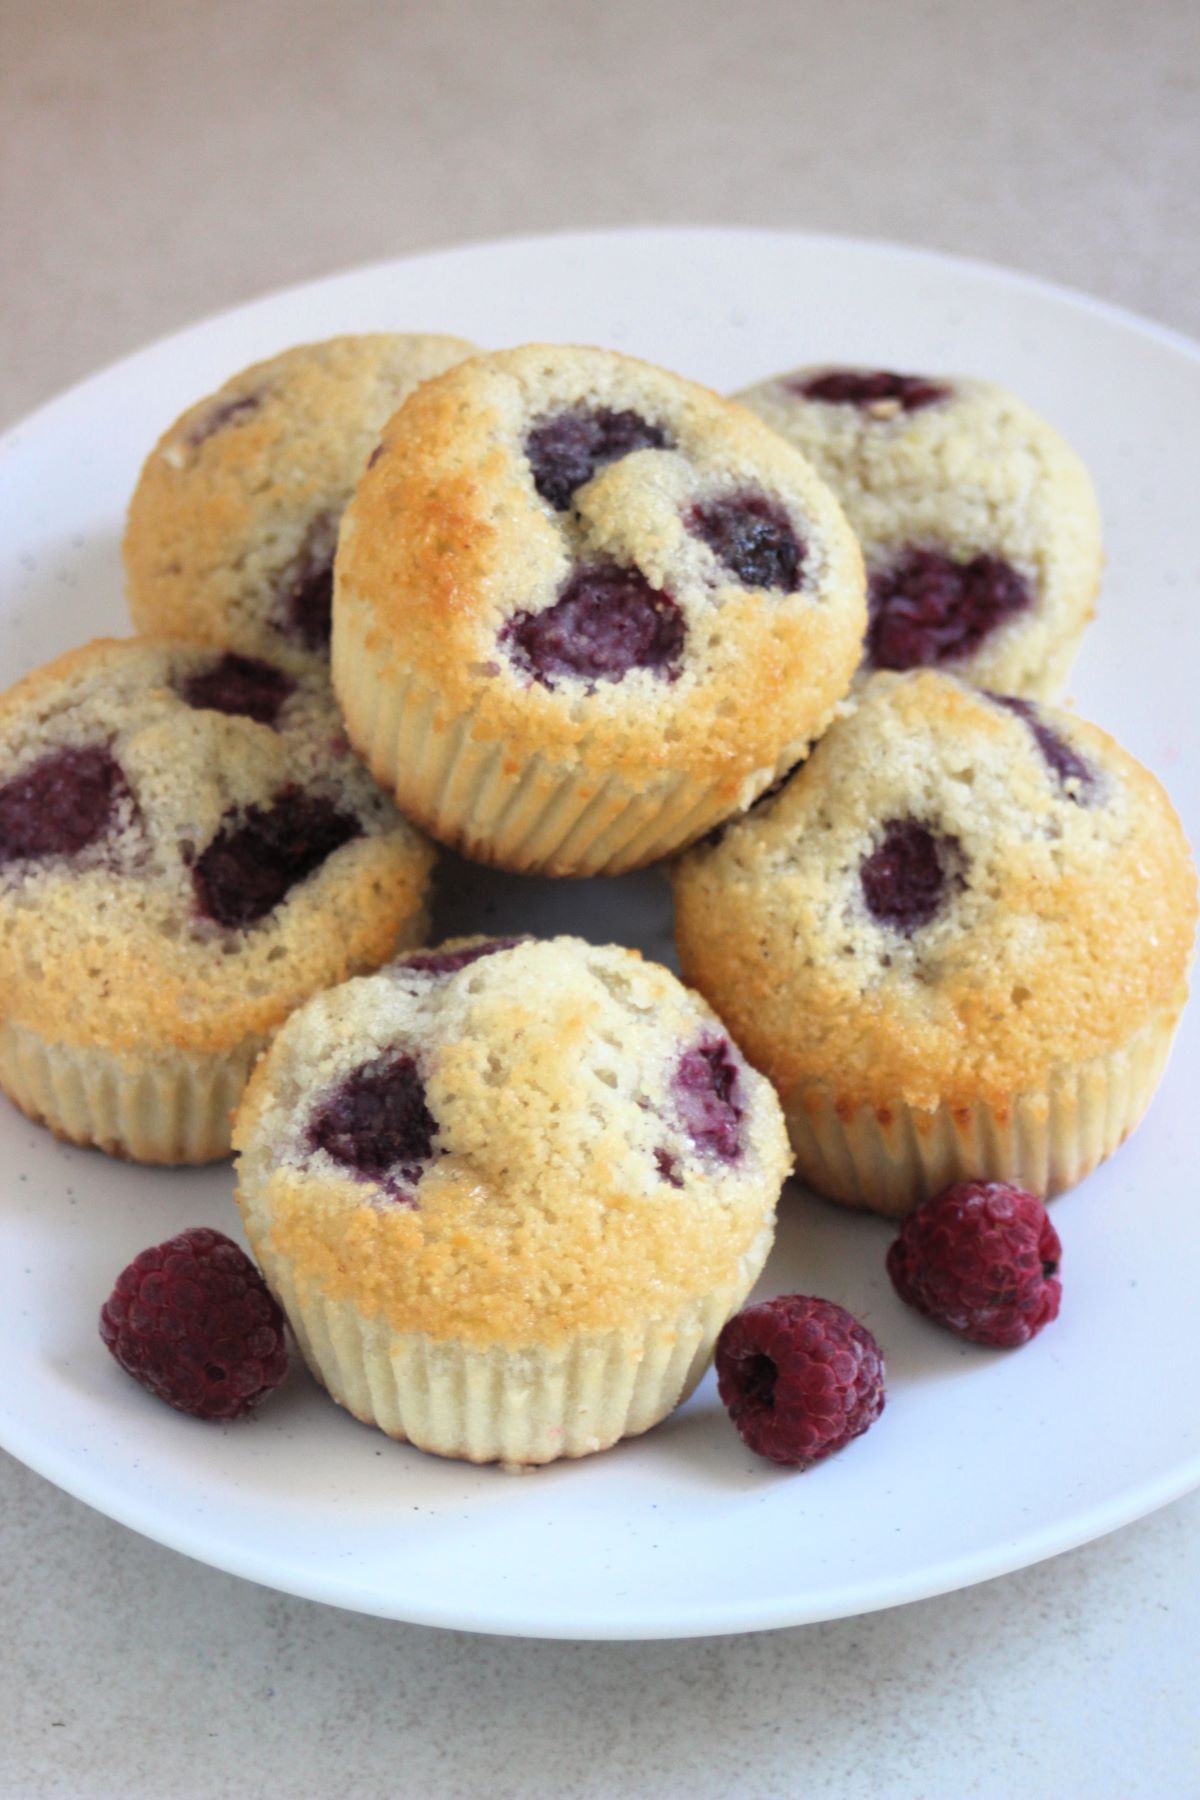 Raspberry muffins on a white plate. Raspberries on the side.